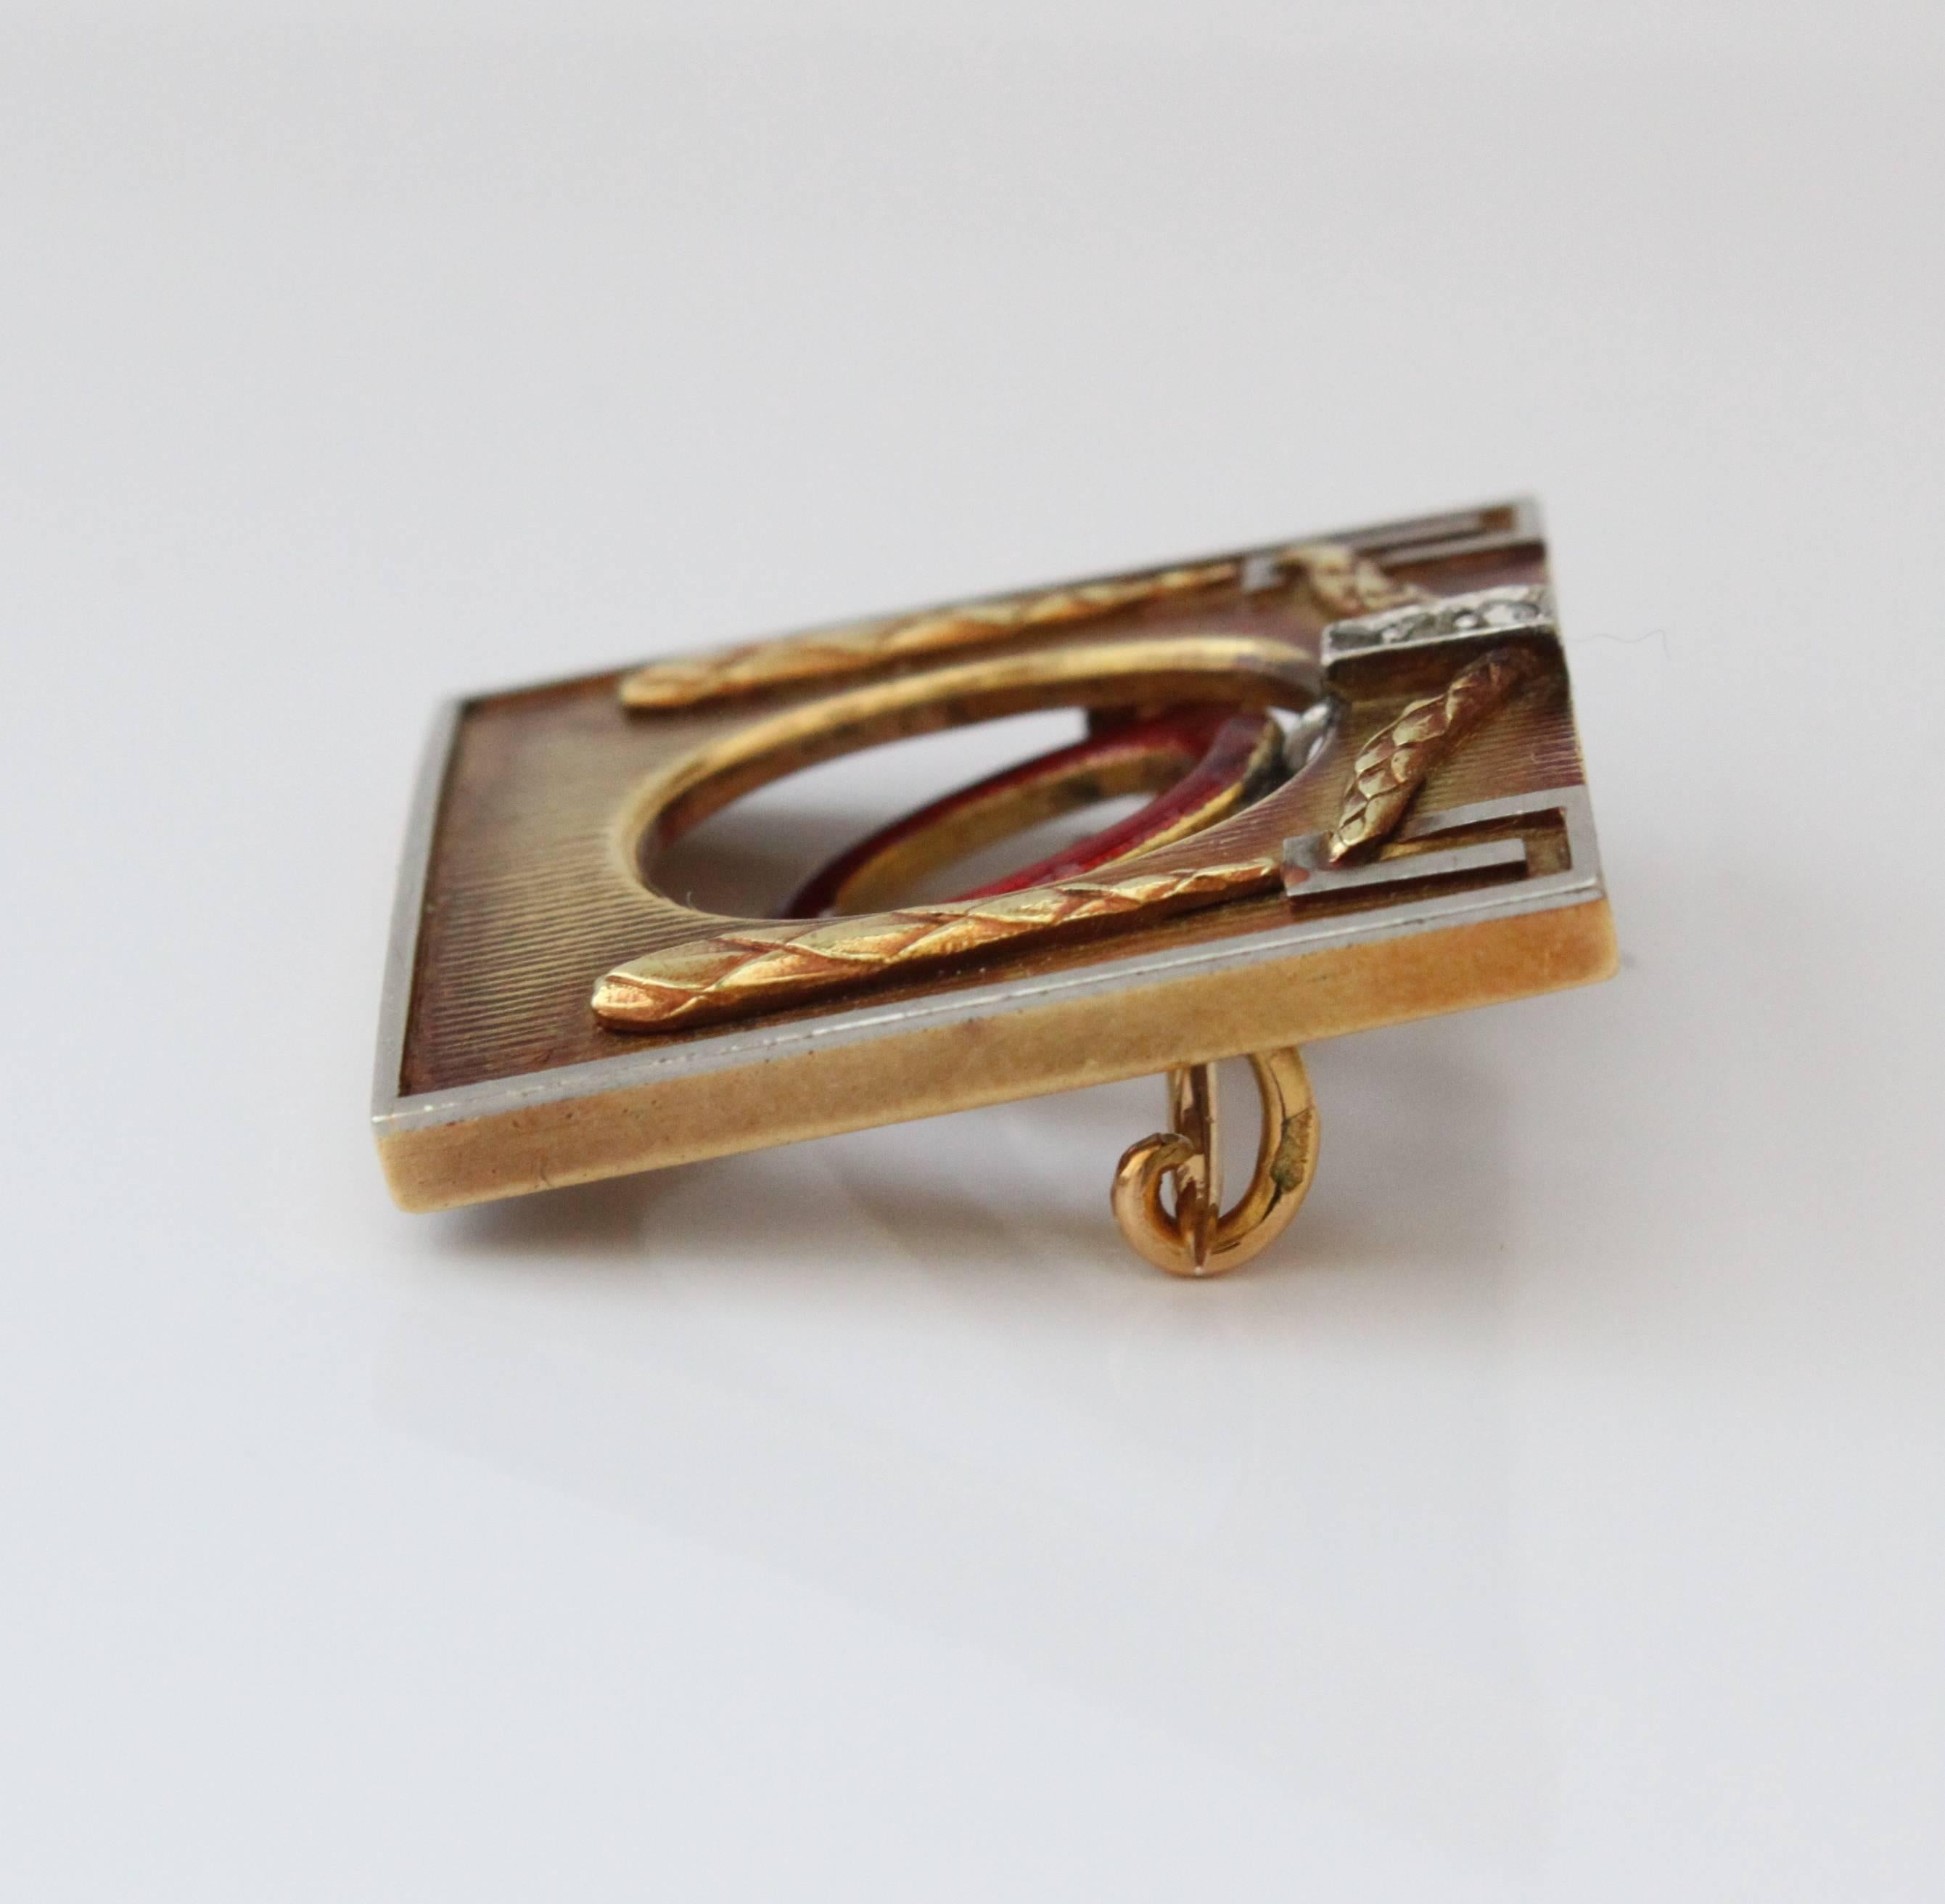 A brooch by Theodor Fahrner from the Jugendstil period depicting an arc with swinging elements. The brooch is in 18k yellow gold and has red enamel, a natural pearl and diamonds in the middle painting the picture of the swinging element. It is